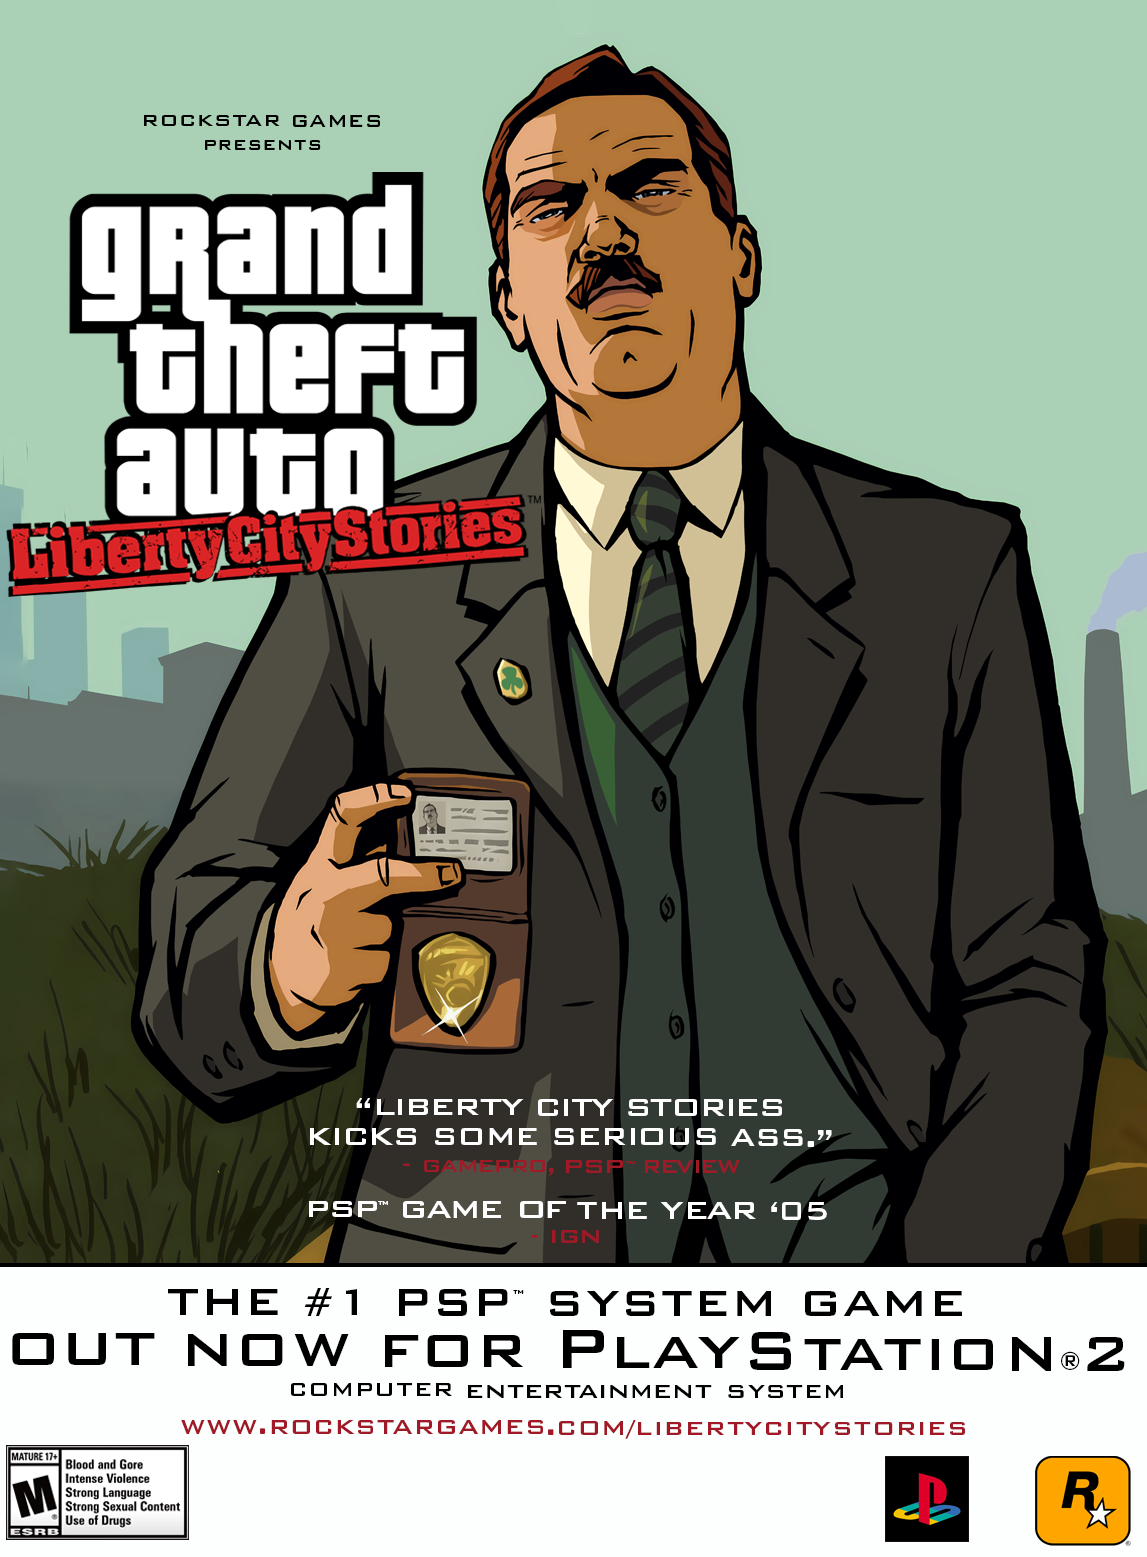 Liberty City Stories and Vice City Stories Now Available for